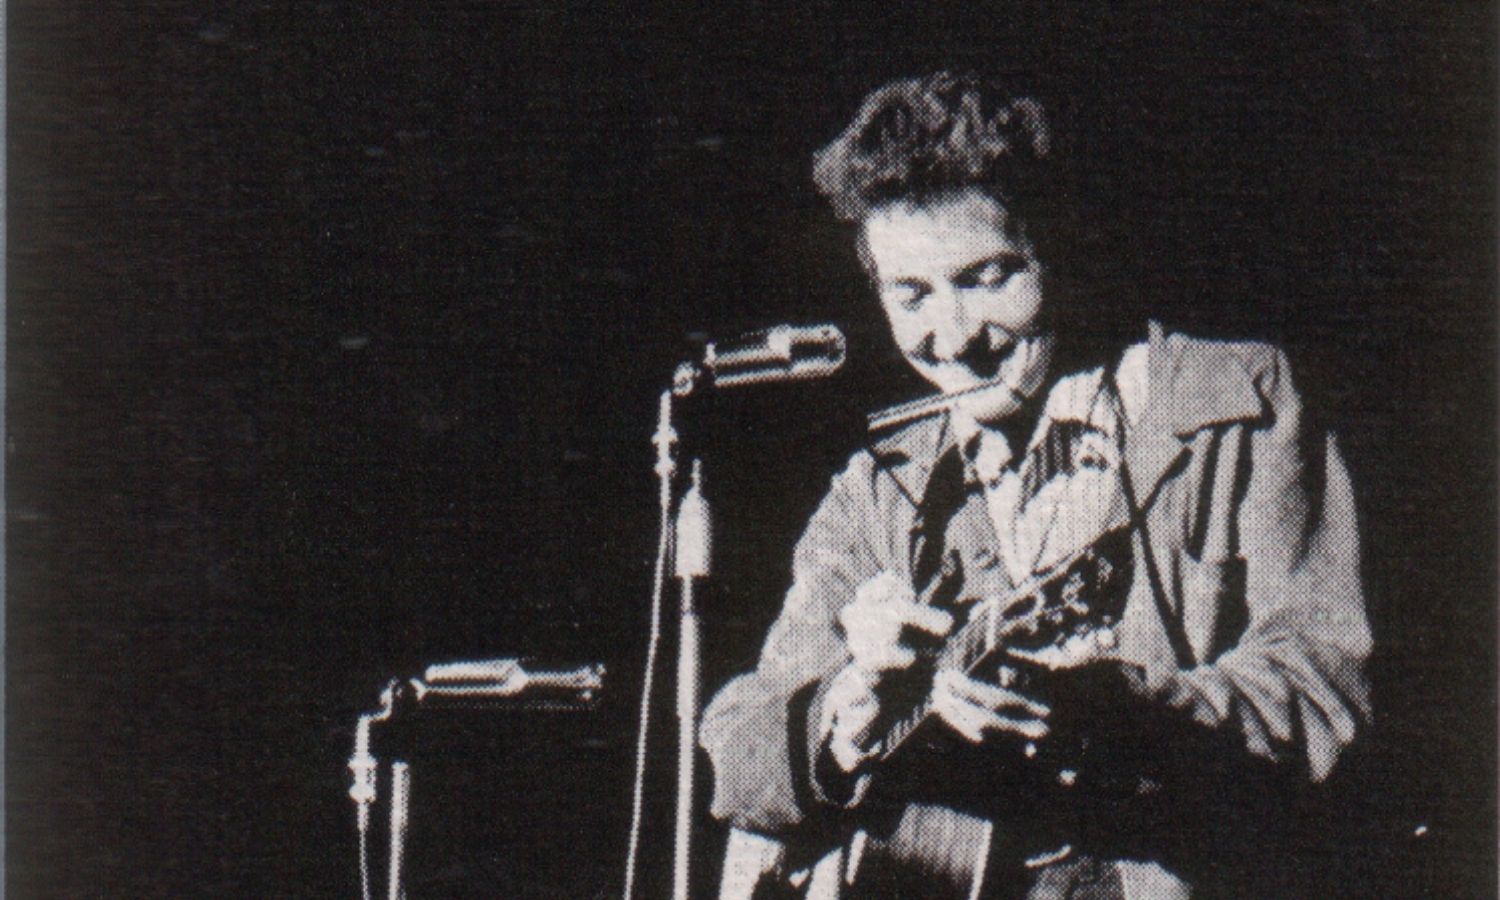 OTD in 1965: Bob Dylan performed his first electric concert at the Newport Folk Festival.